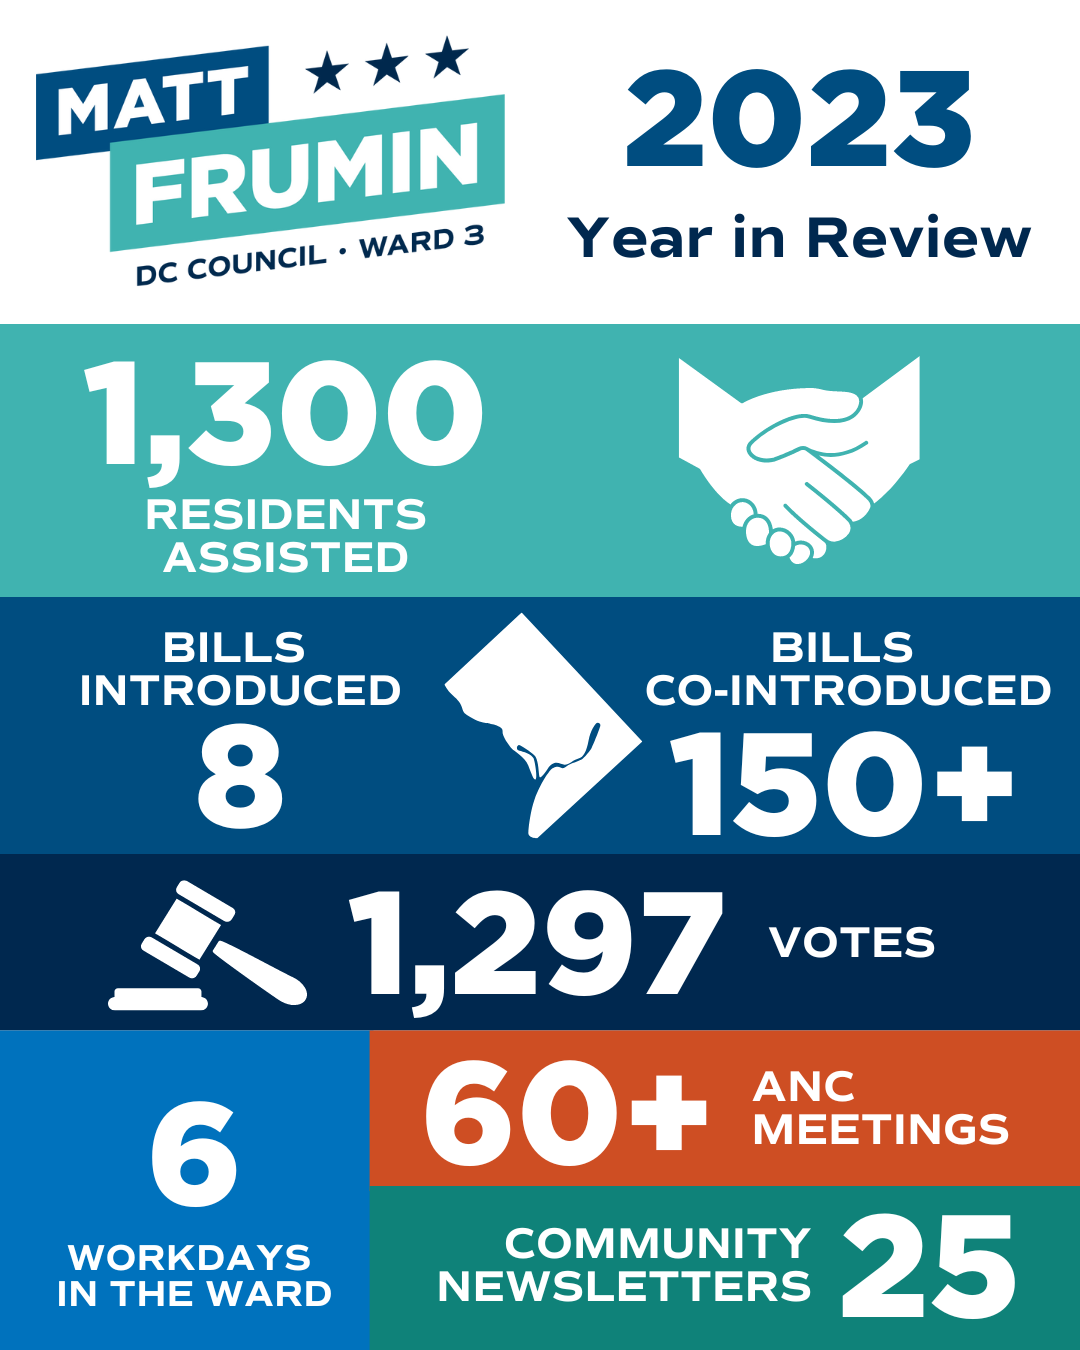 Frumin 2023 Year in Review